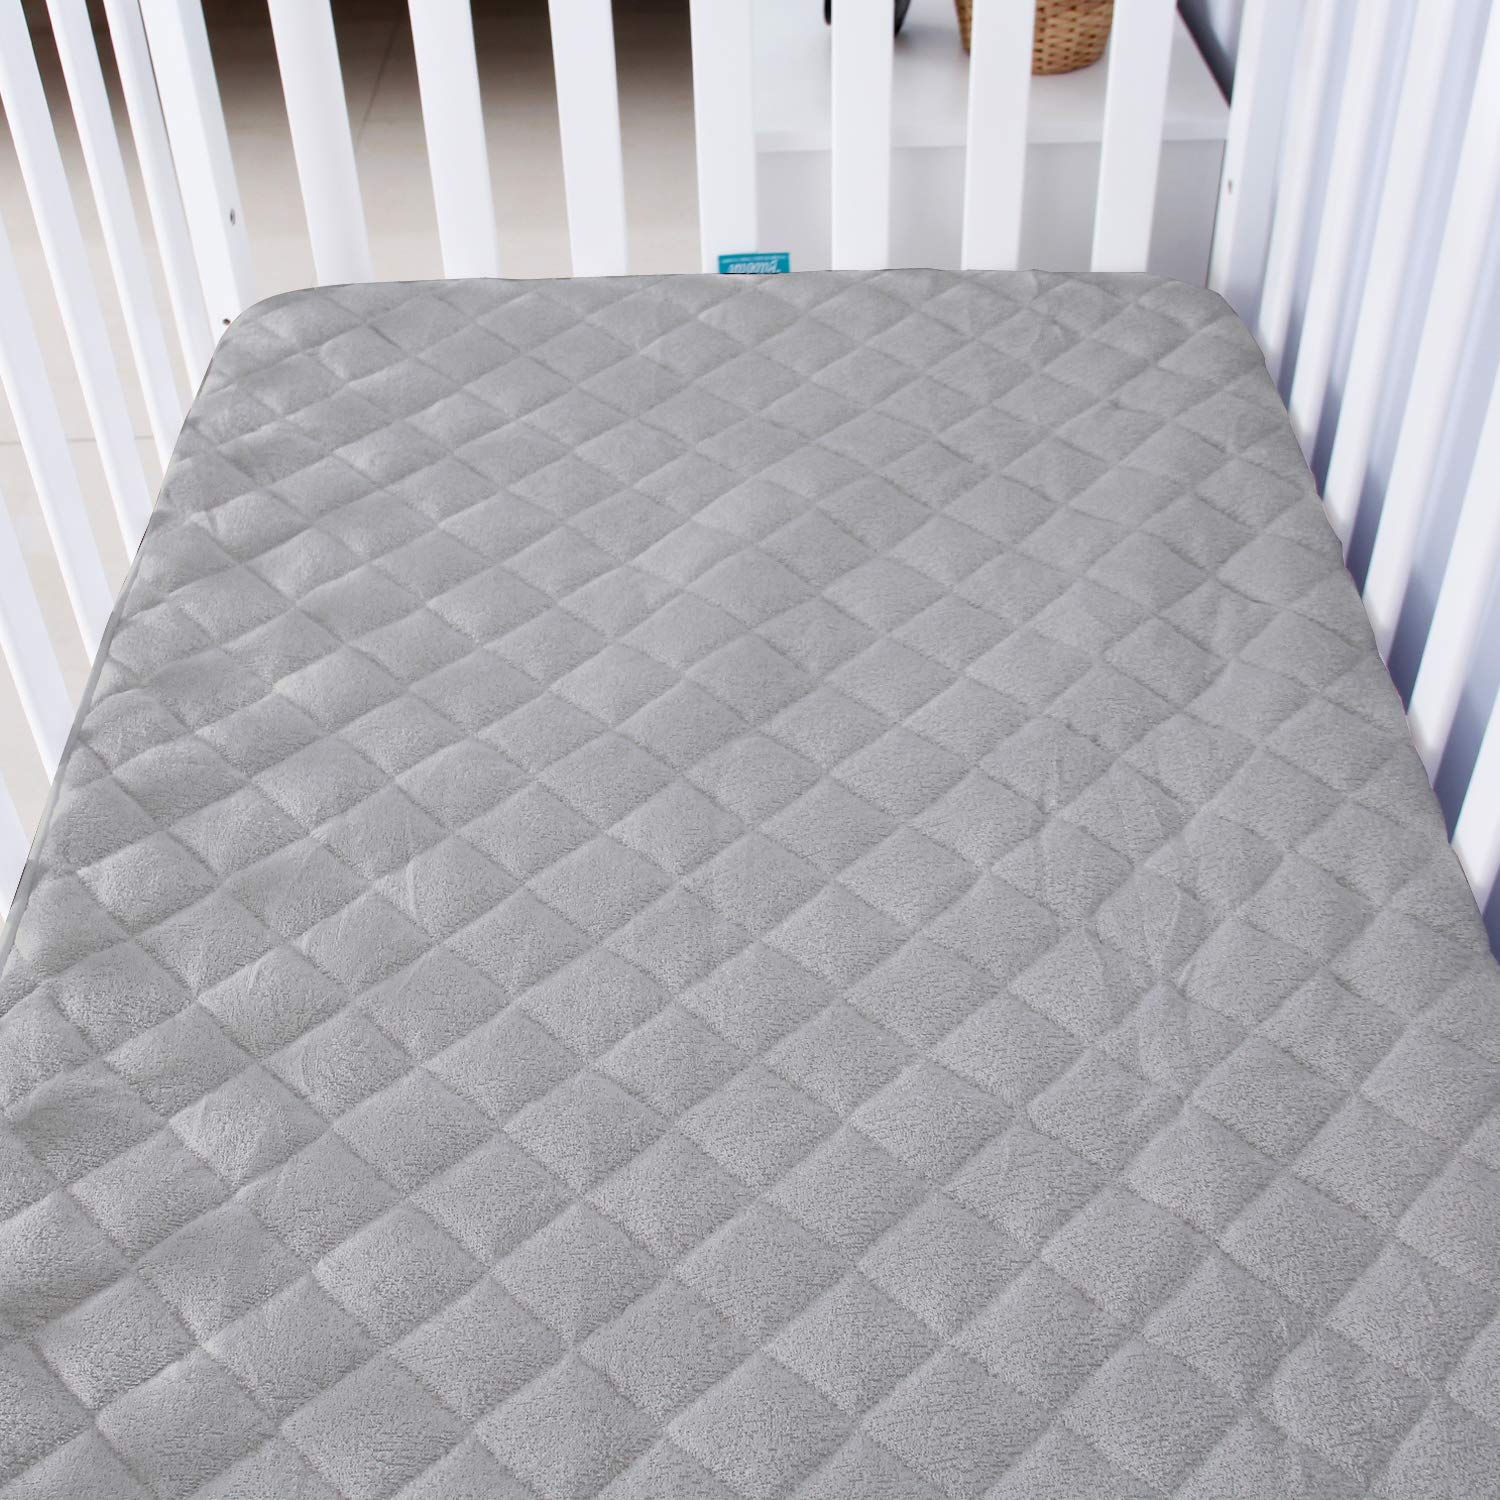 American Baby Company Natural Waterproof Quilted Sheet Saver Made with Organic Cotton